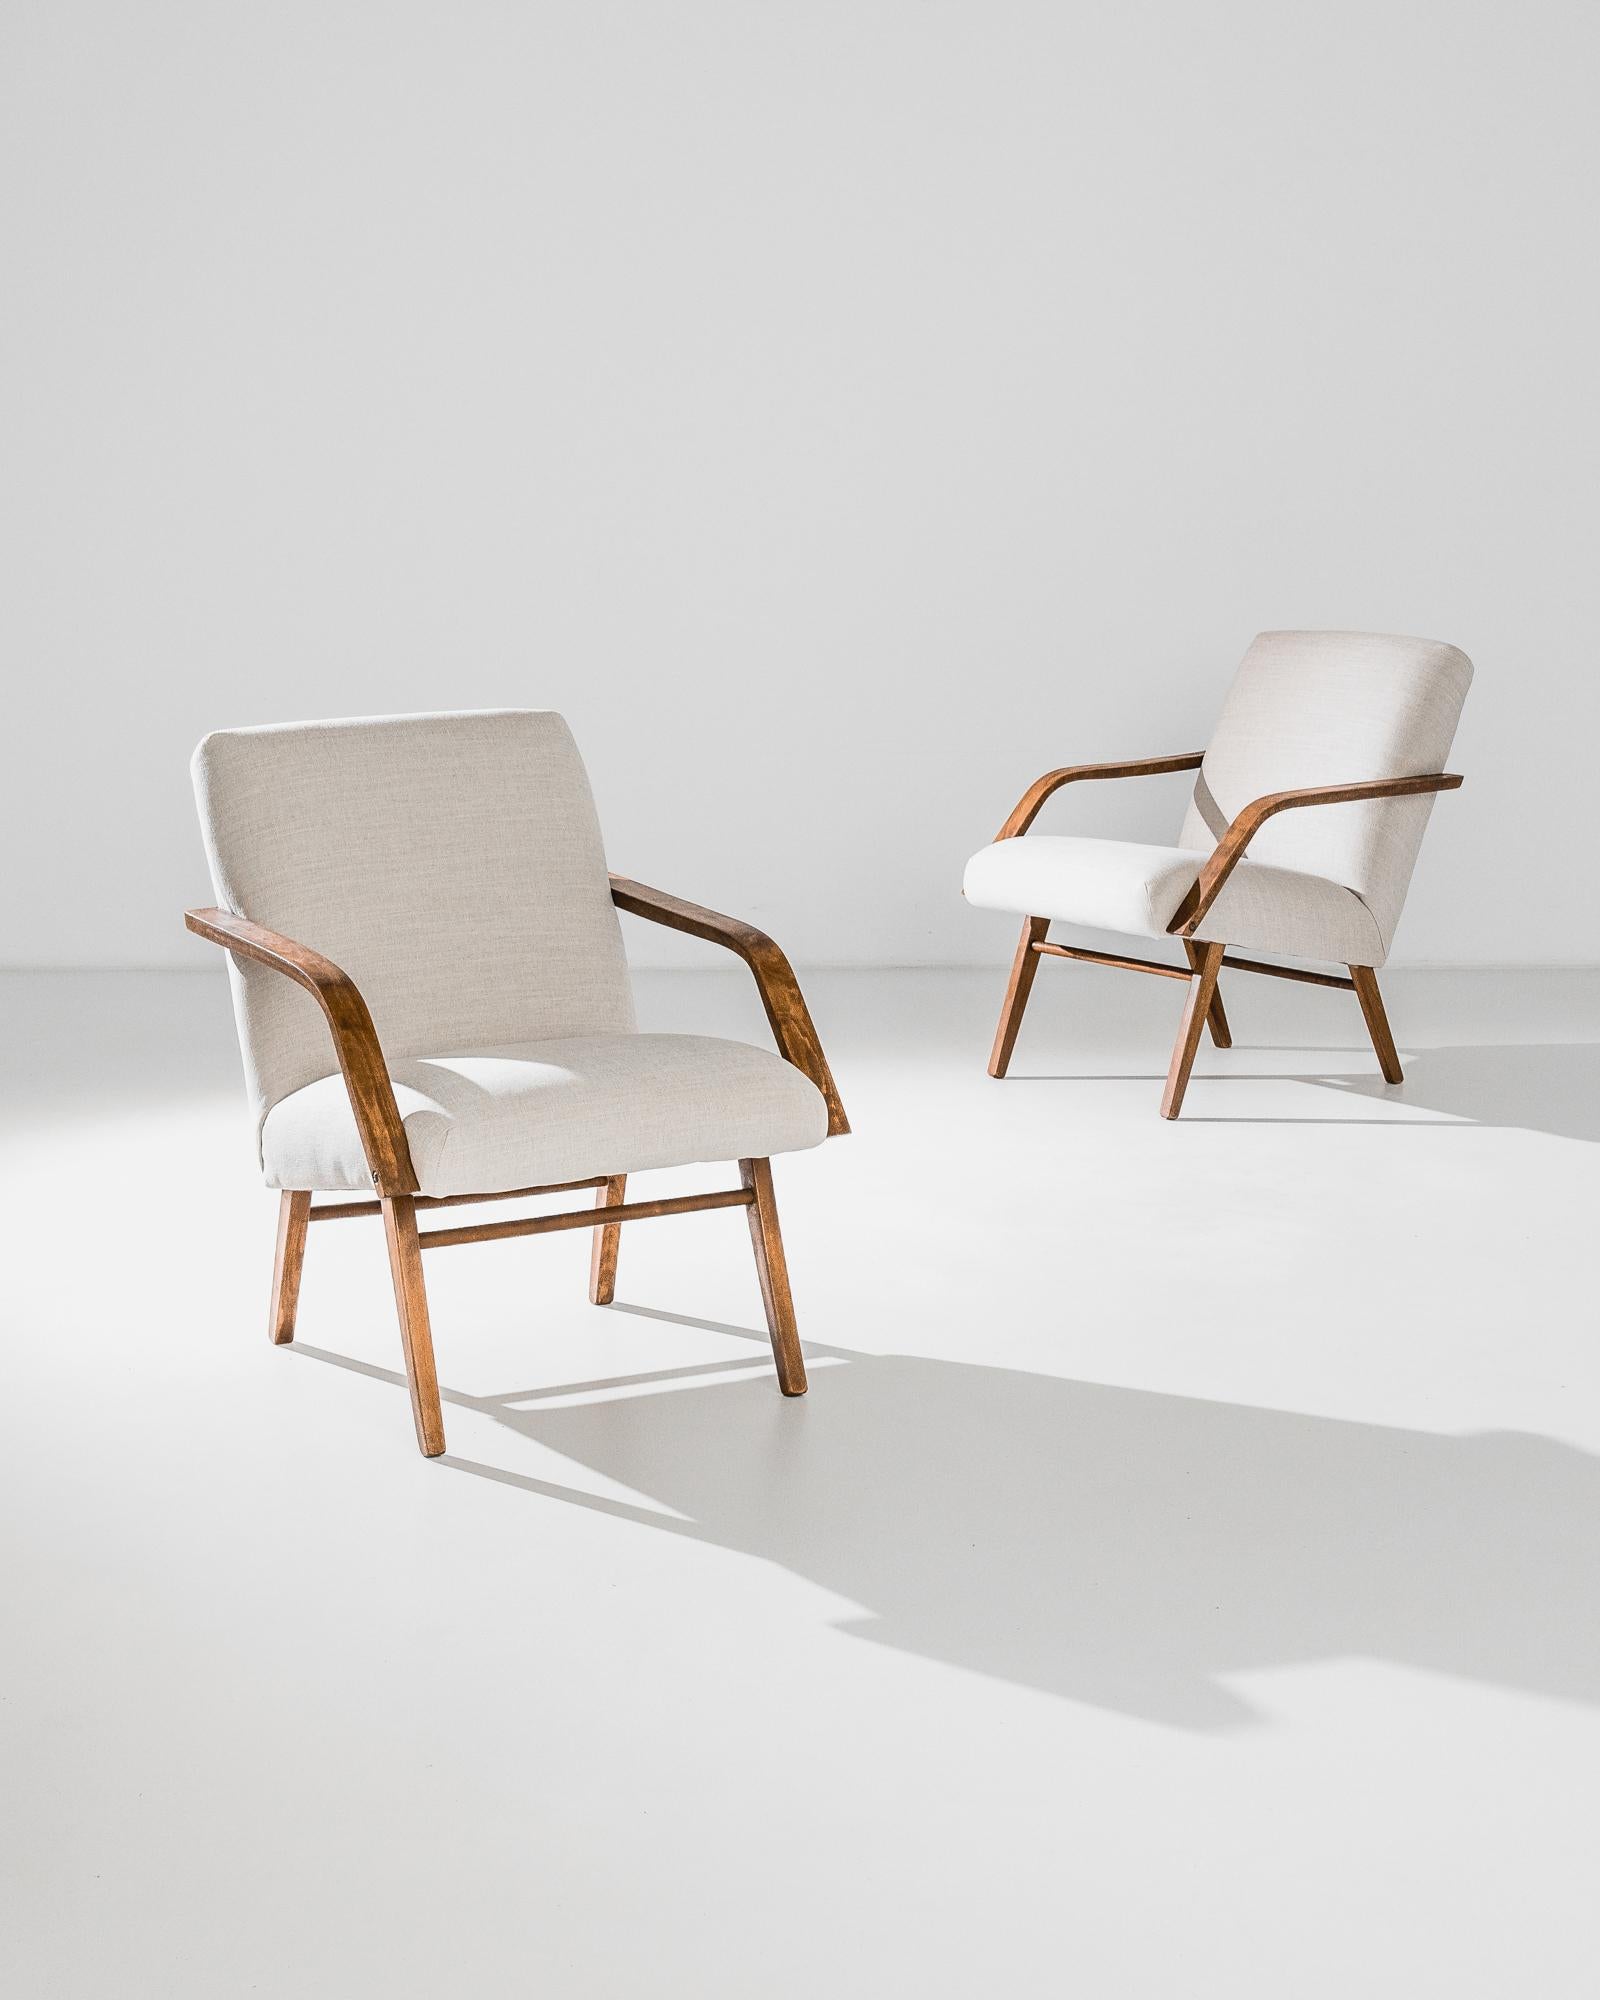 Produced in the former Czechoslovakia, this essential 1960s design is attributed to Jaroslav Šmídek. Comfortable angles and clean lines are designed to delight, influenced by the mid-20th Century Modernist movement in Central Europe. These